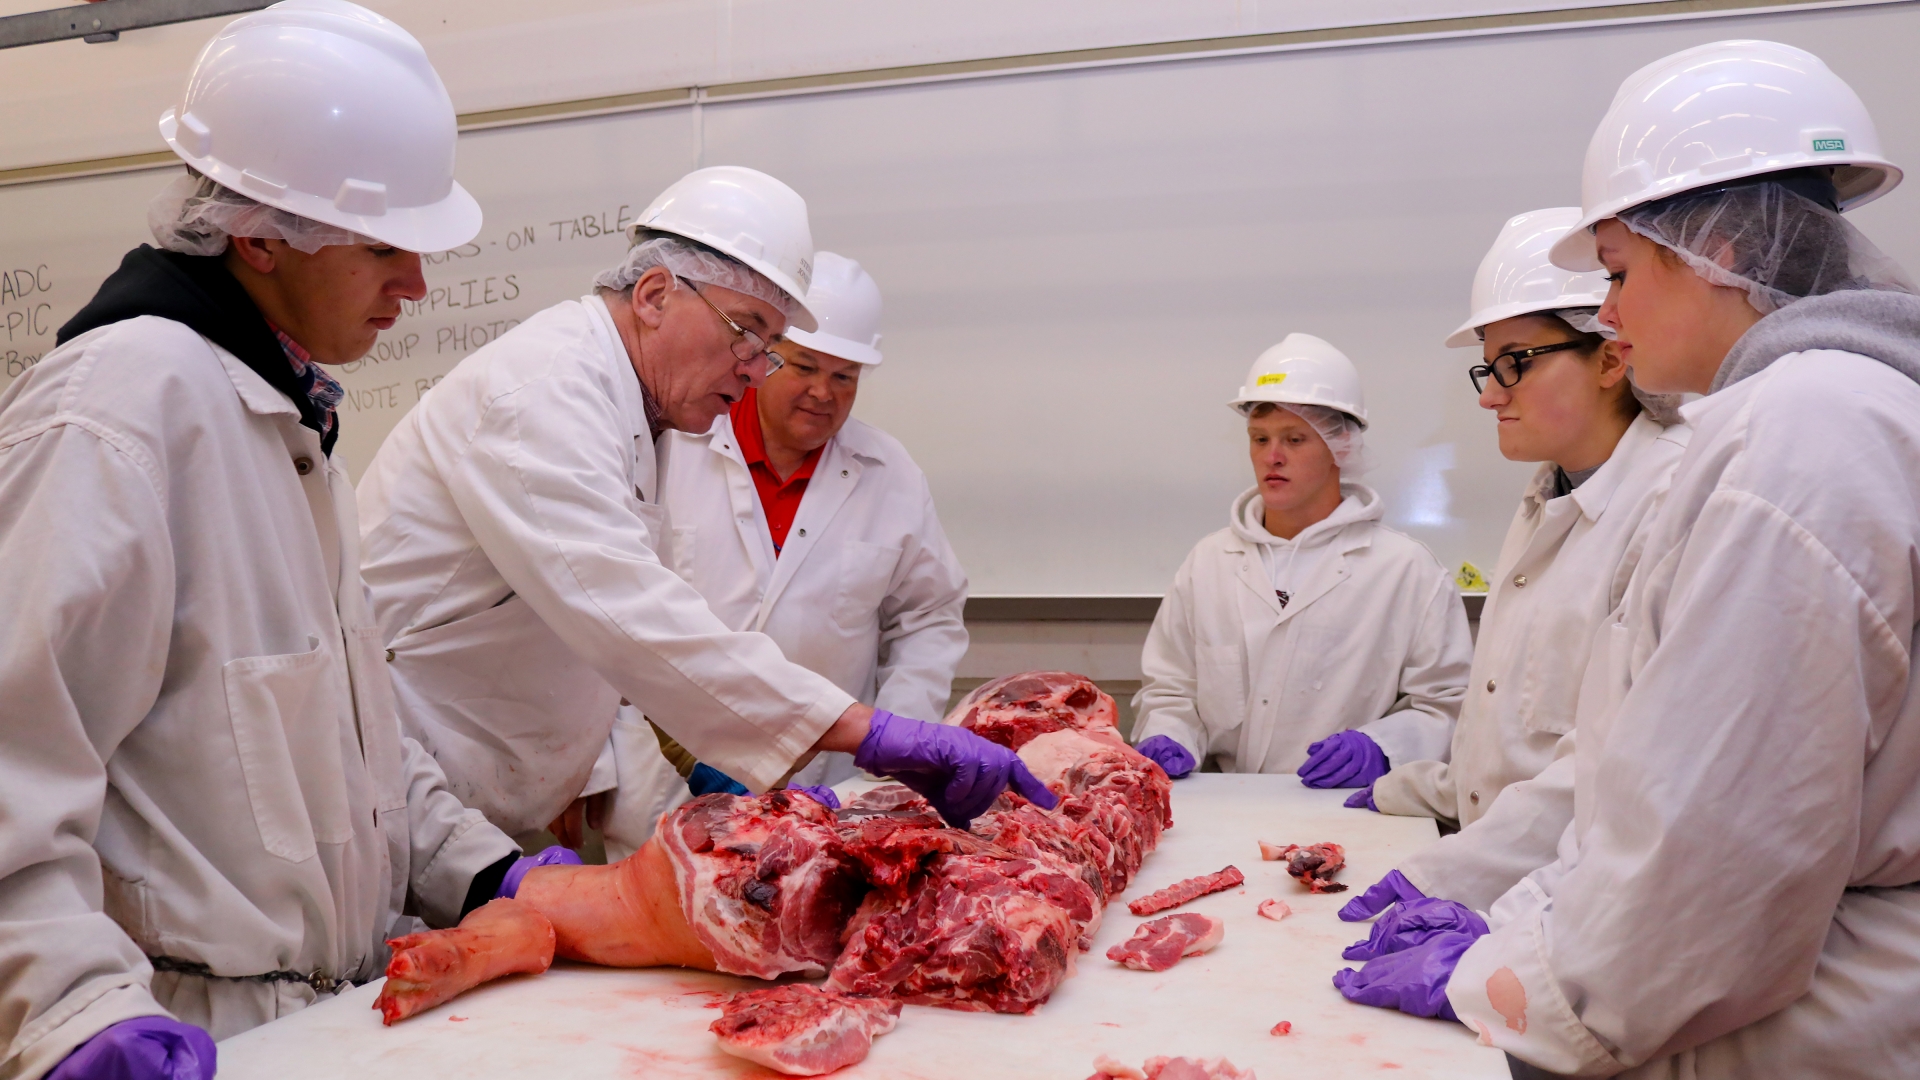 Some students evaluating meat that is hanging.